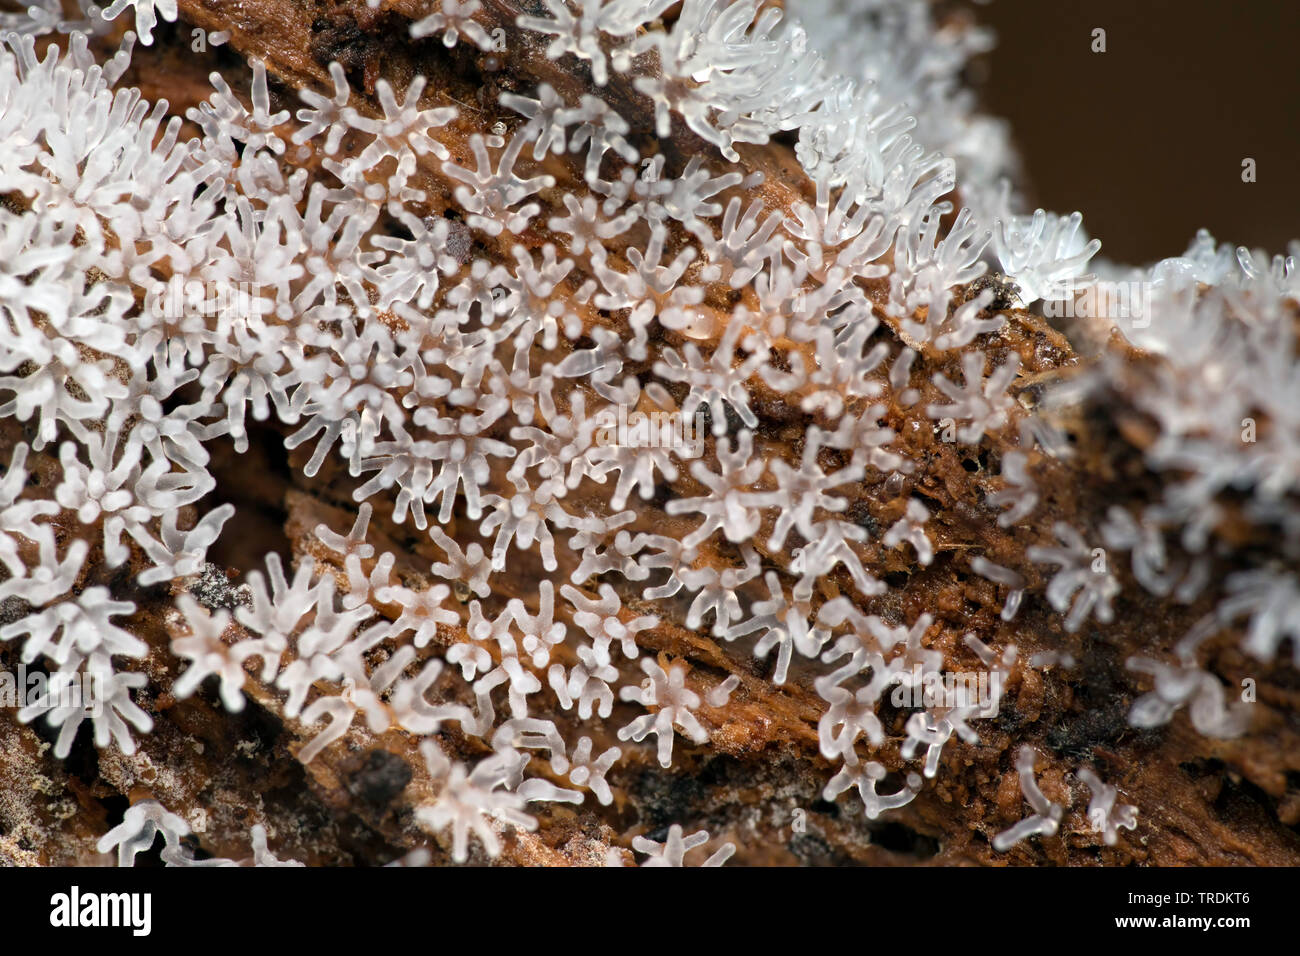 Coral slime mold (Ceratiomyxa fruticulosa), on dead wood, Netherlands, Northern Netherlands Stock Photo